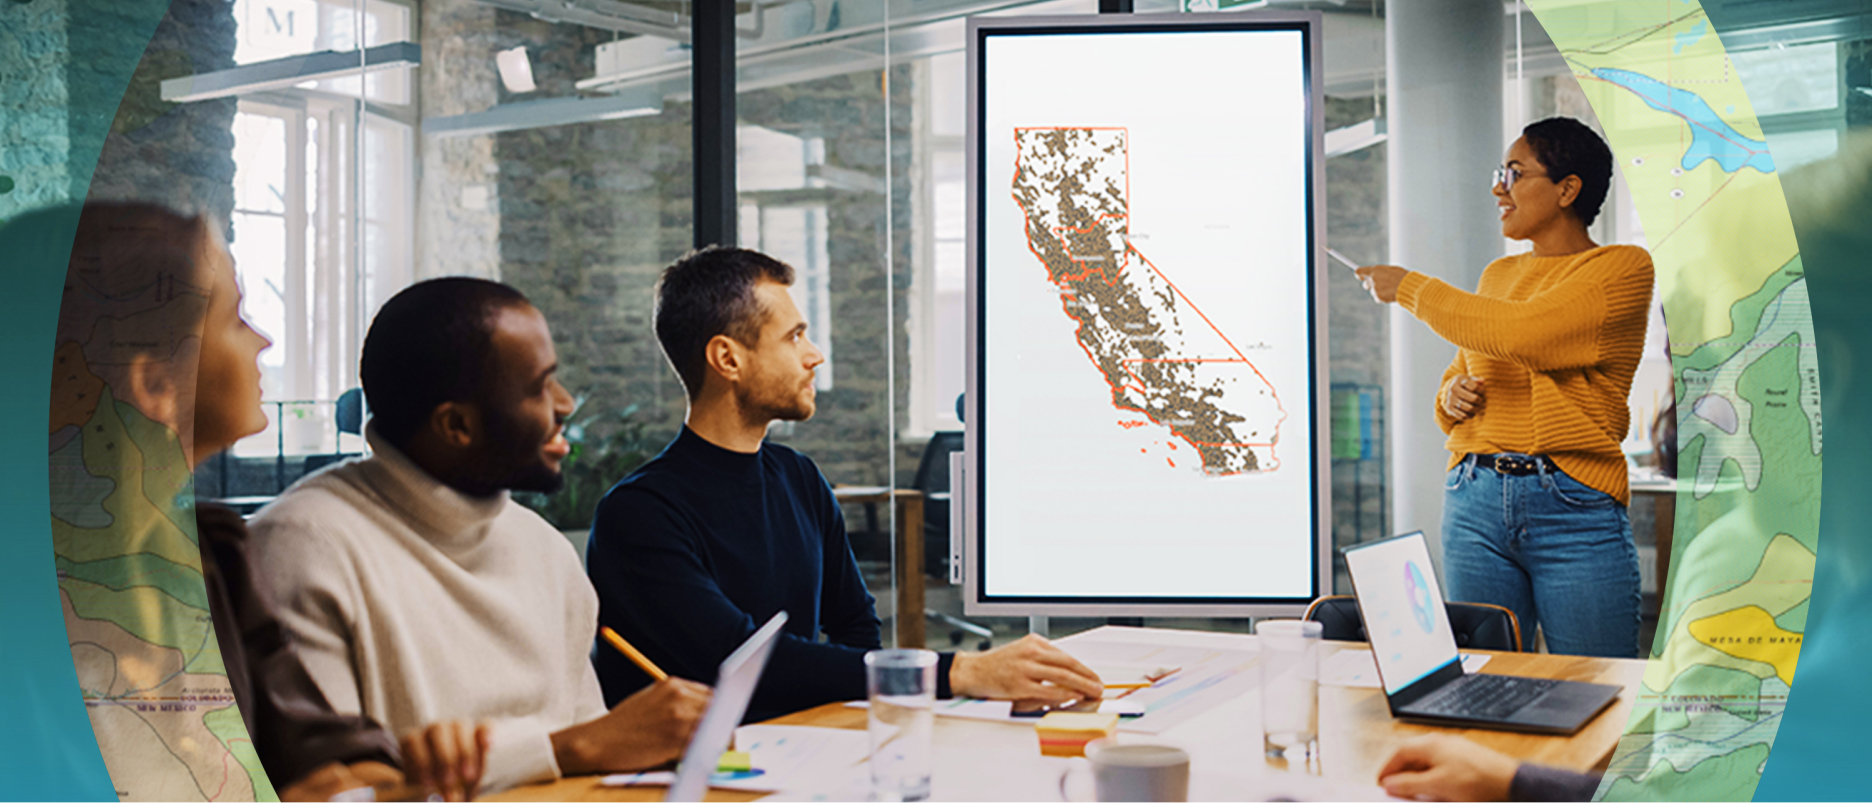 People at a conference table looking at a large digital map